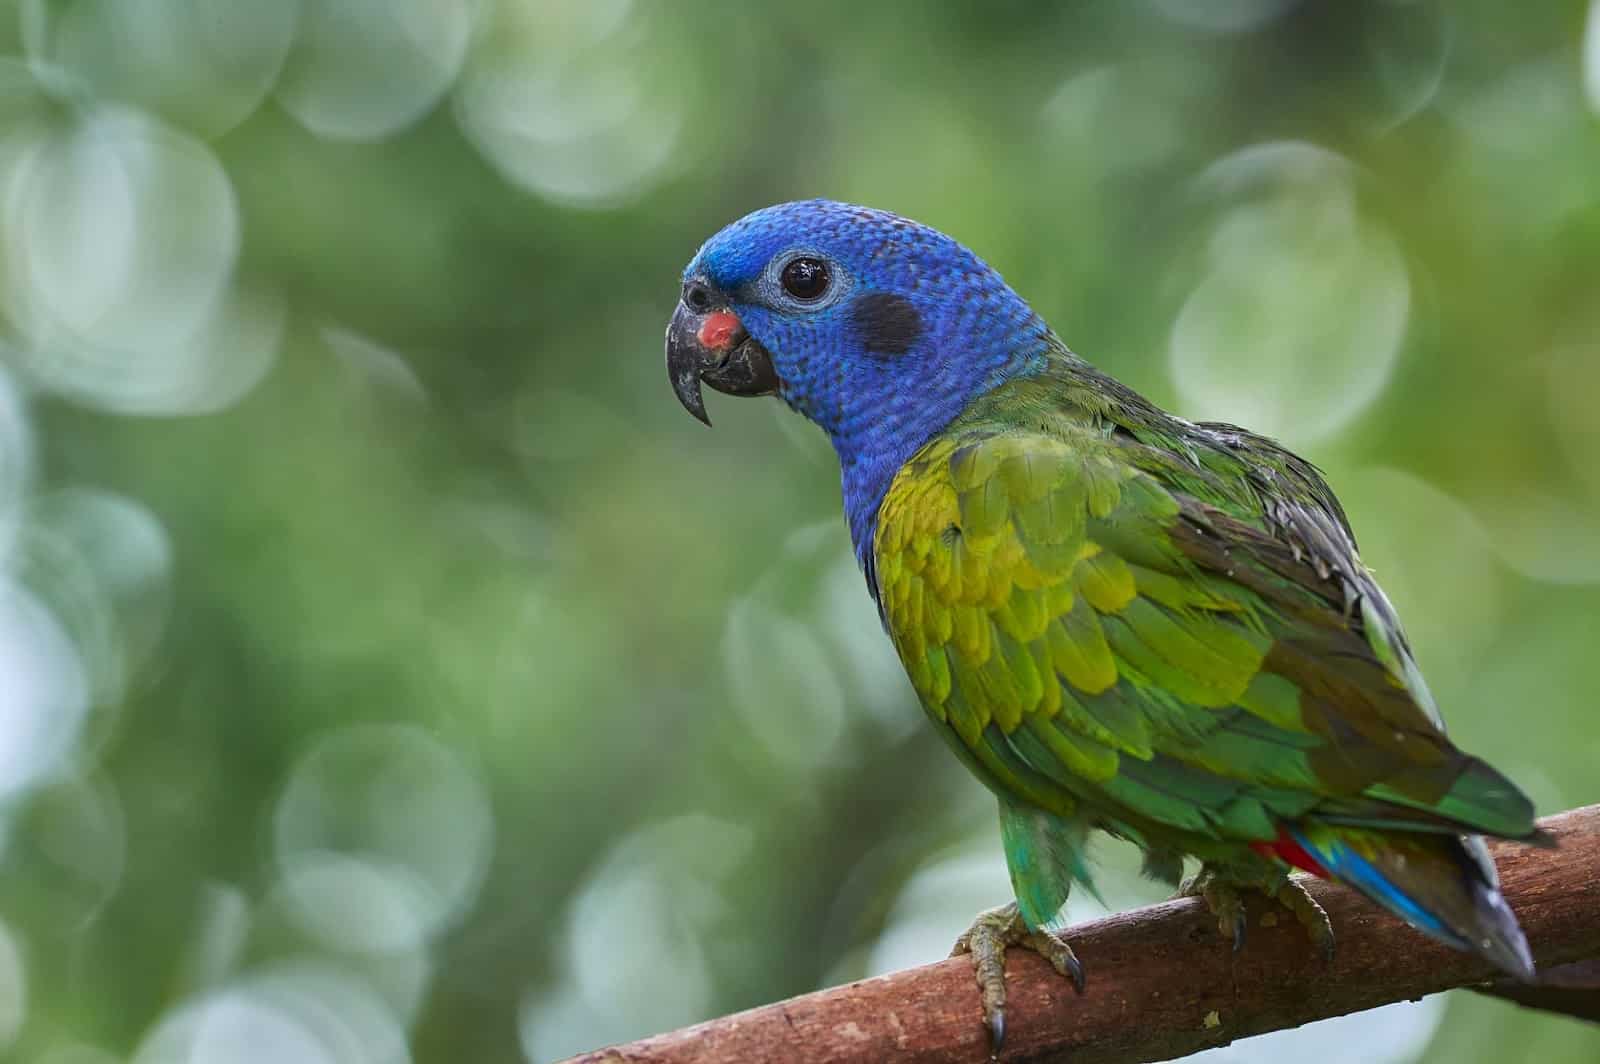 How To Improve Pionus Parrots Lifespan (In The Wild and Captivity) by Petrestart.com.